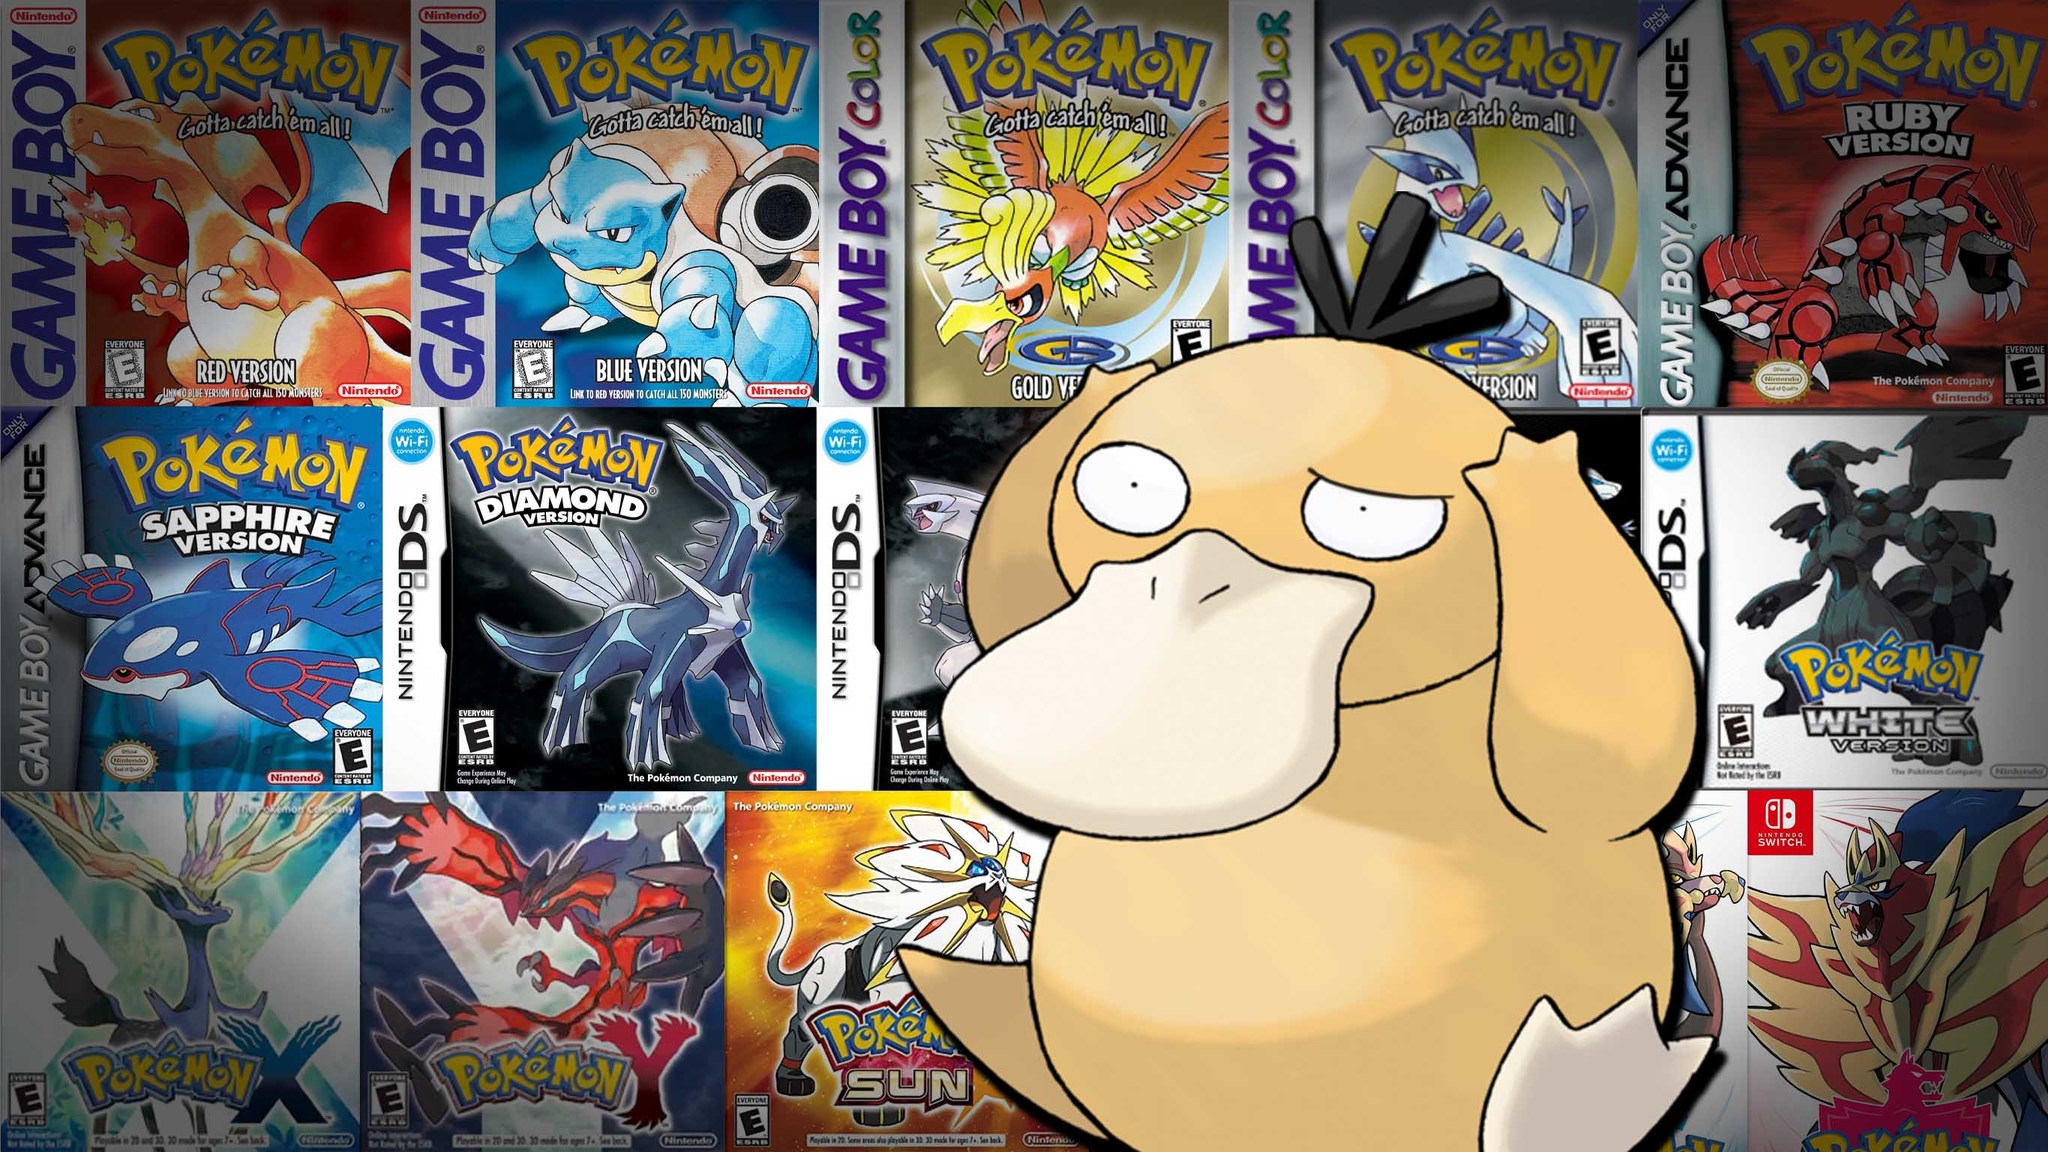 All Shiny Eevee evolutions in Pokemon ranked from worst to best